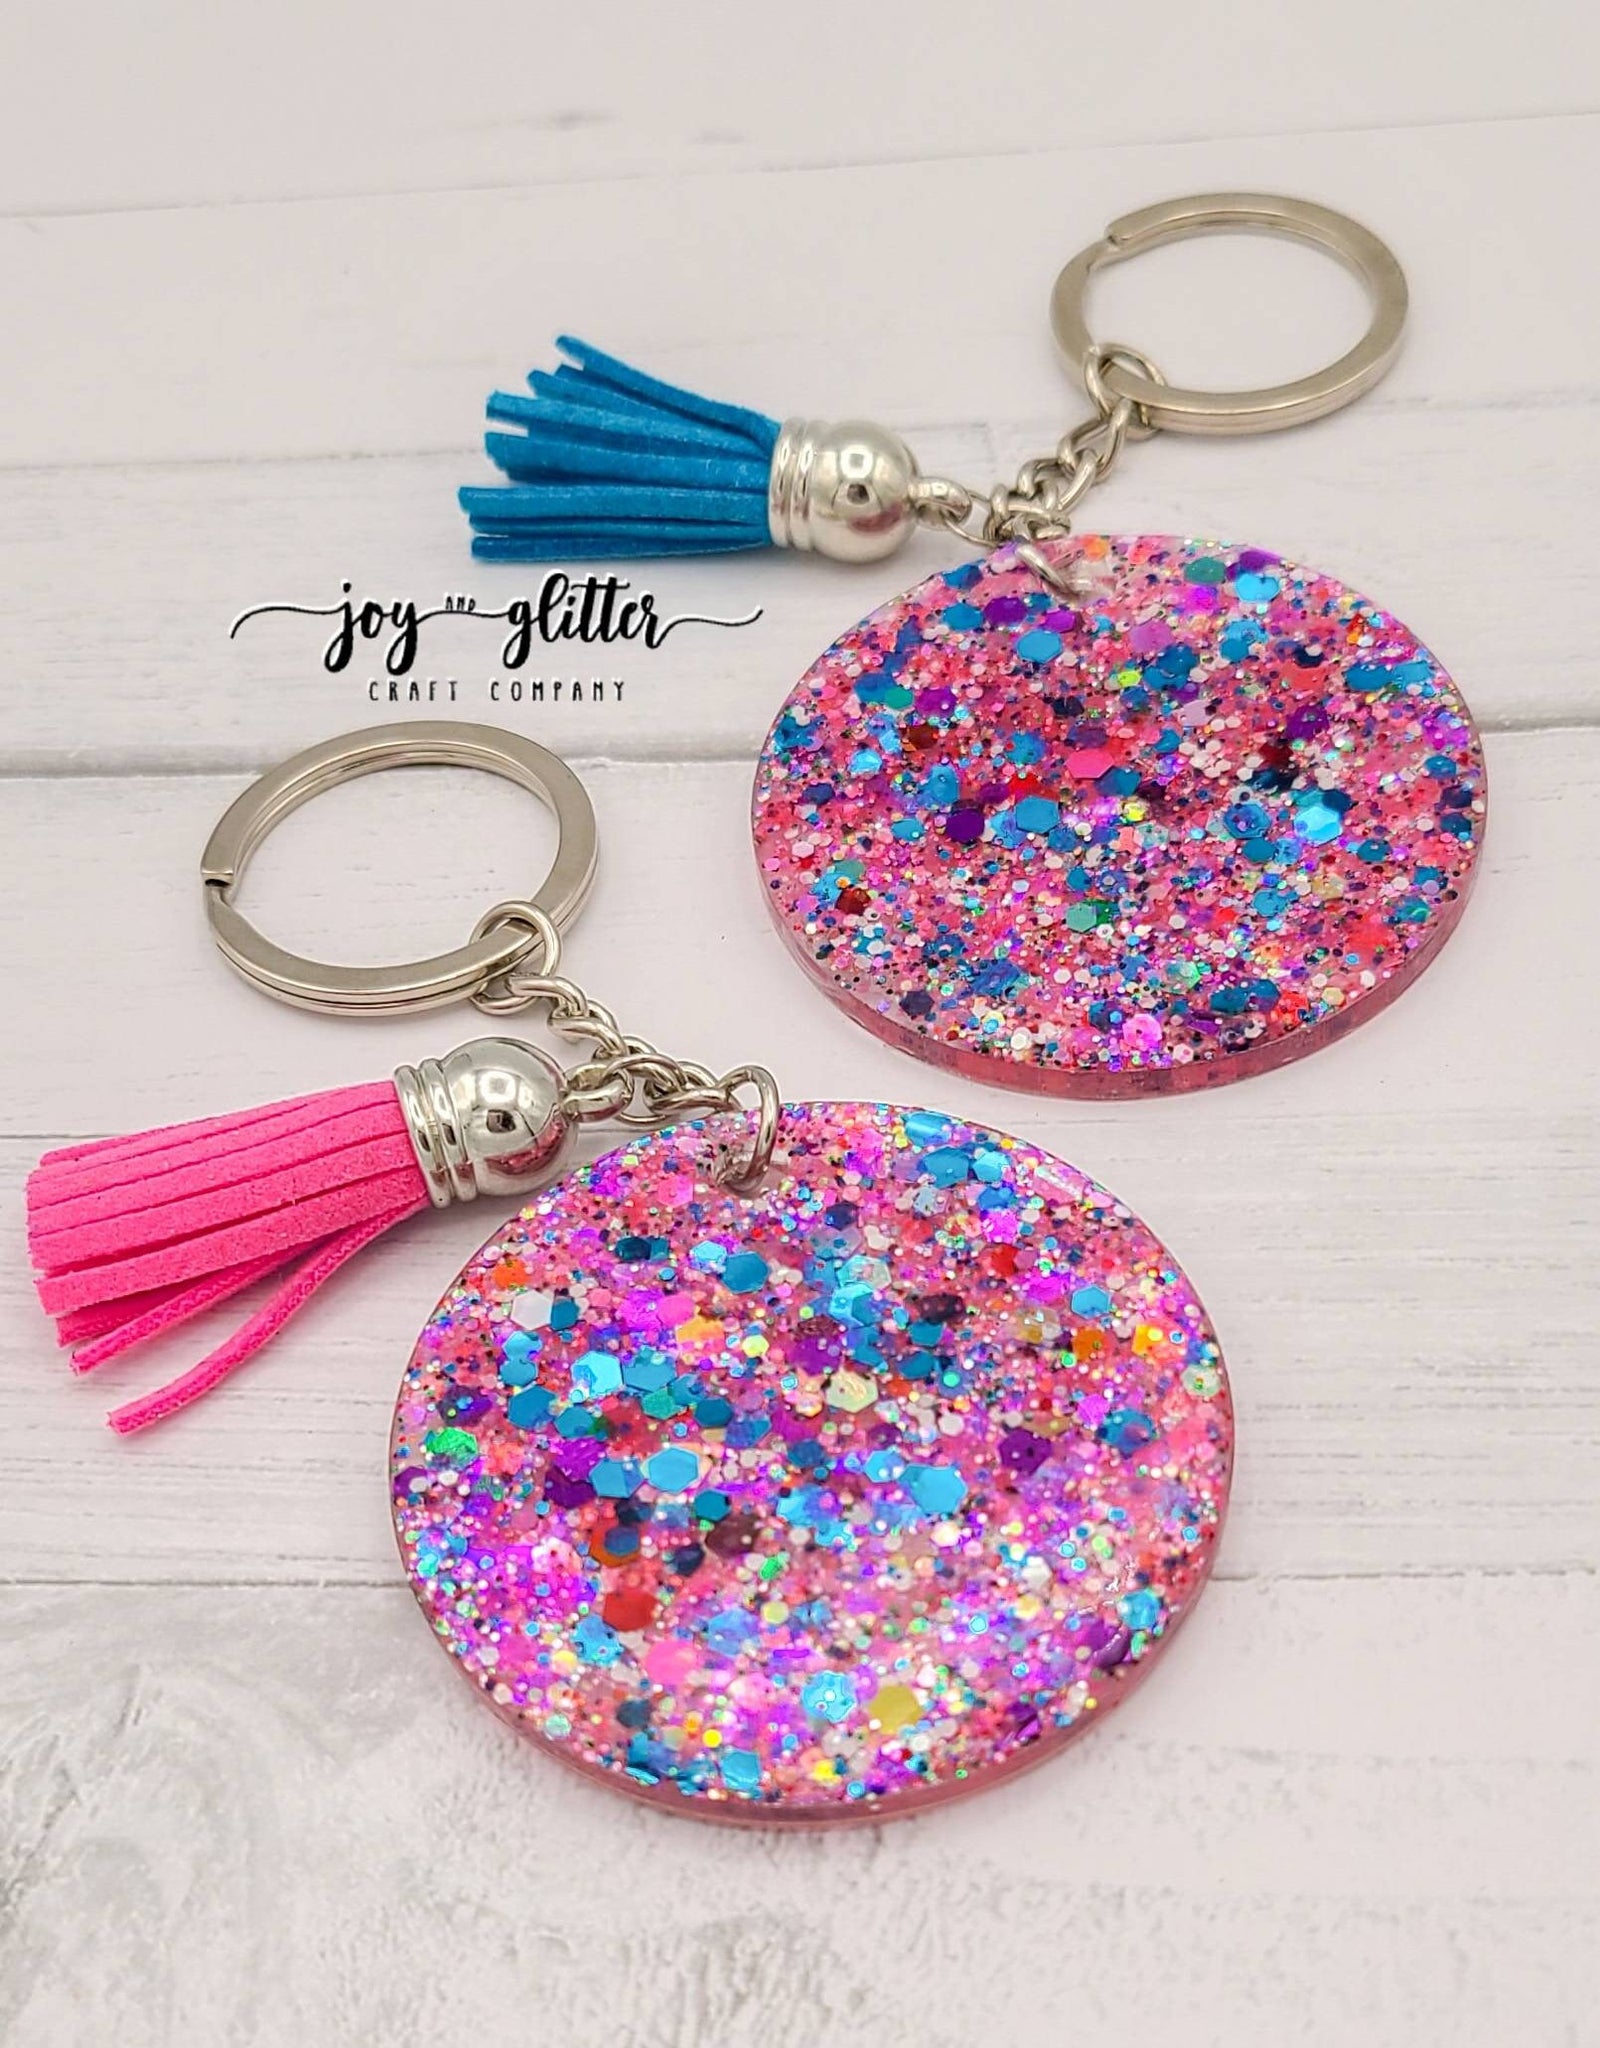 Set of Adorable Matching Unicorn Best Friends Silver Keychains Pink